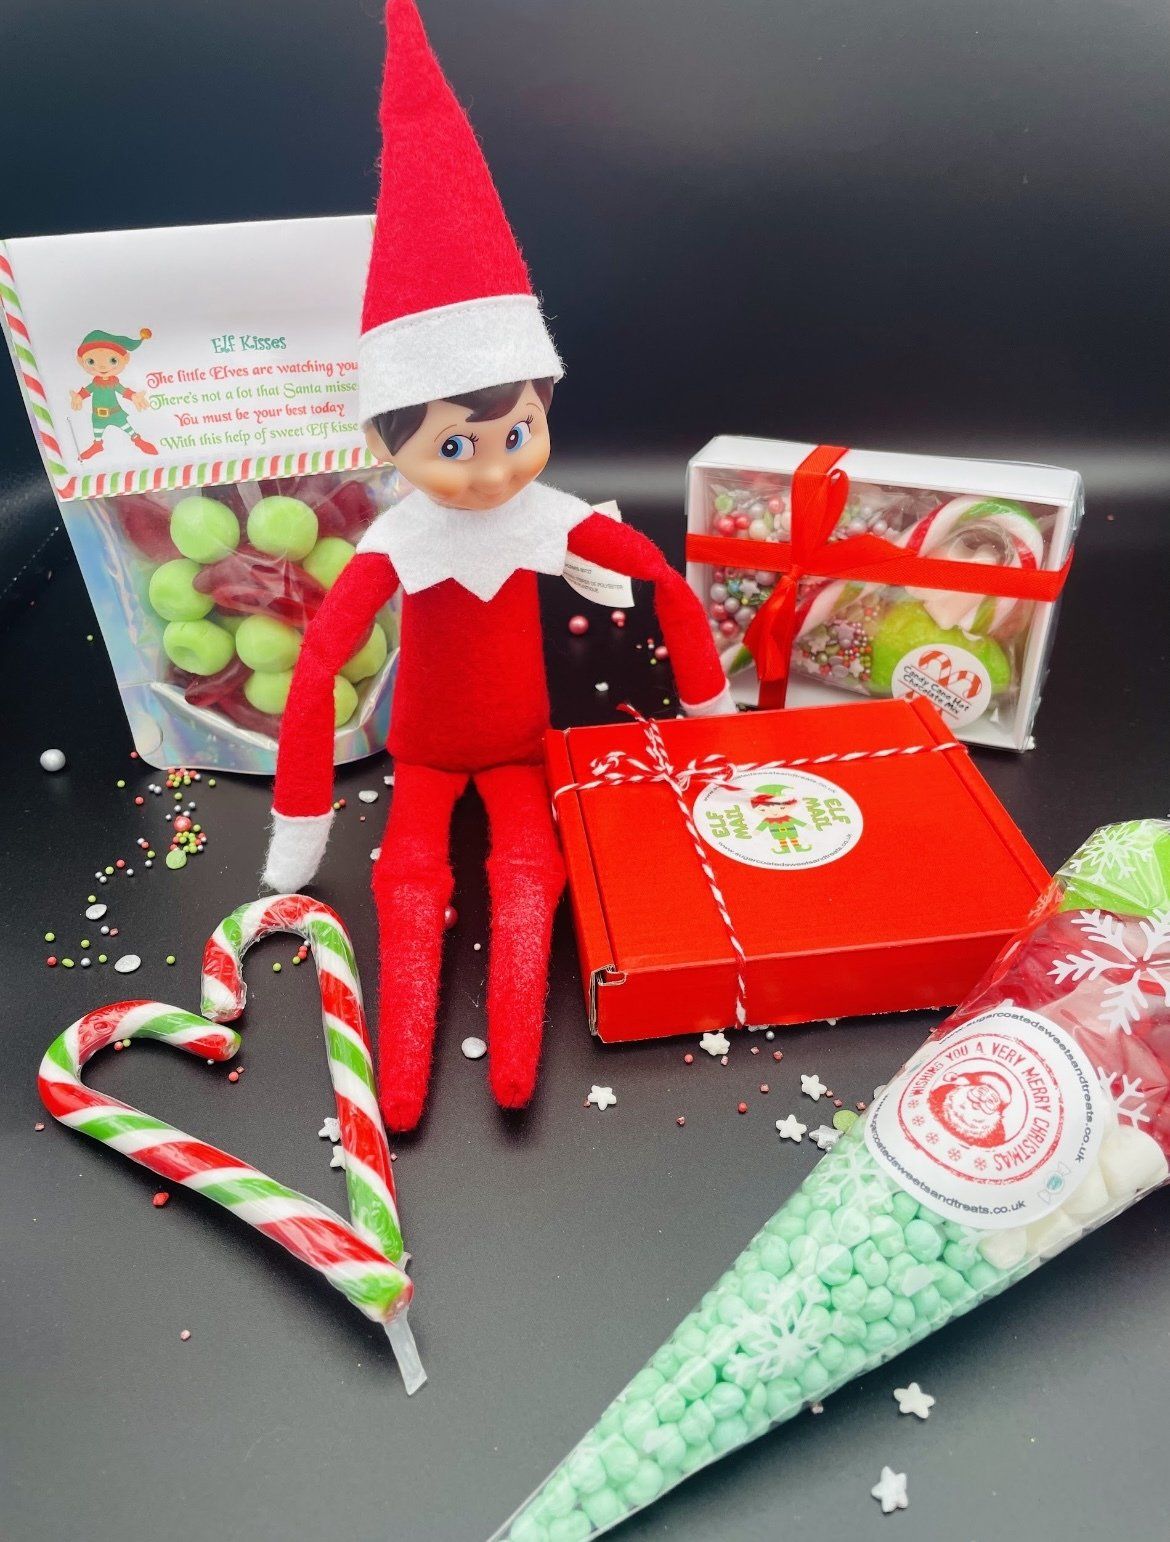 Sweet Ideas for your Elf on the Shelf!